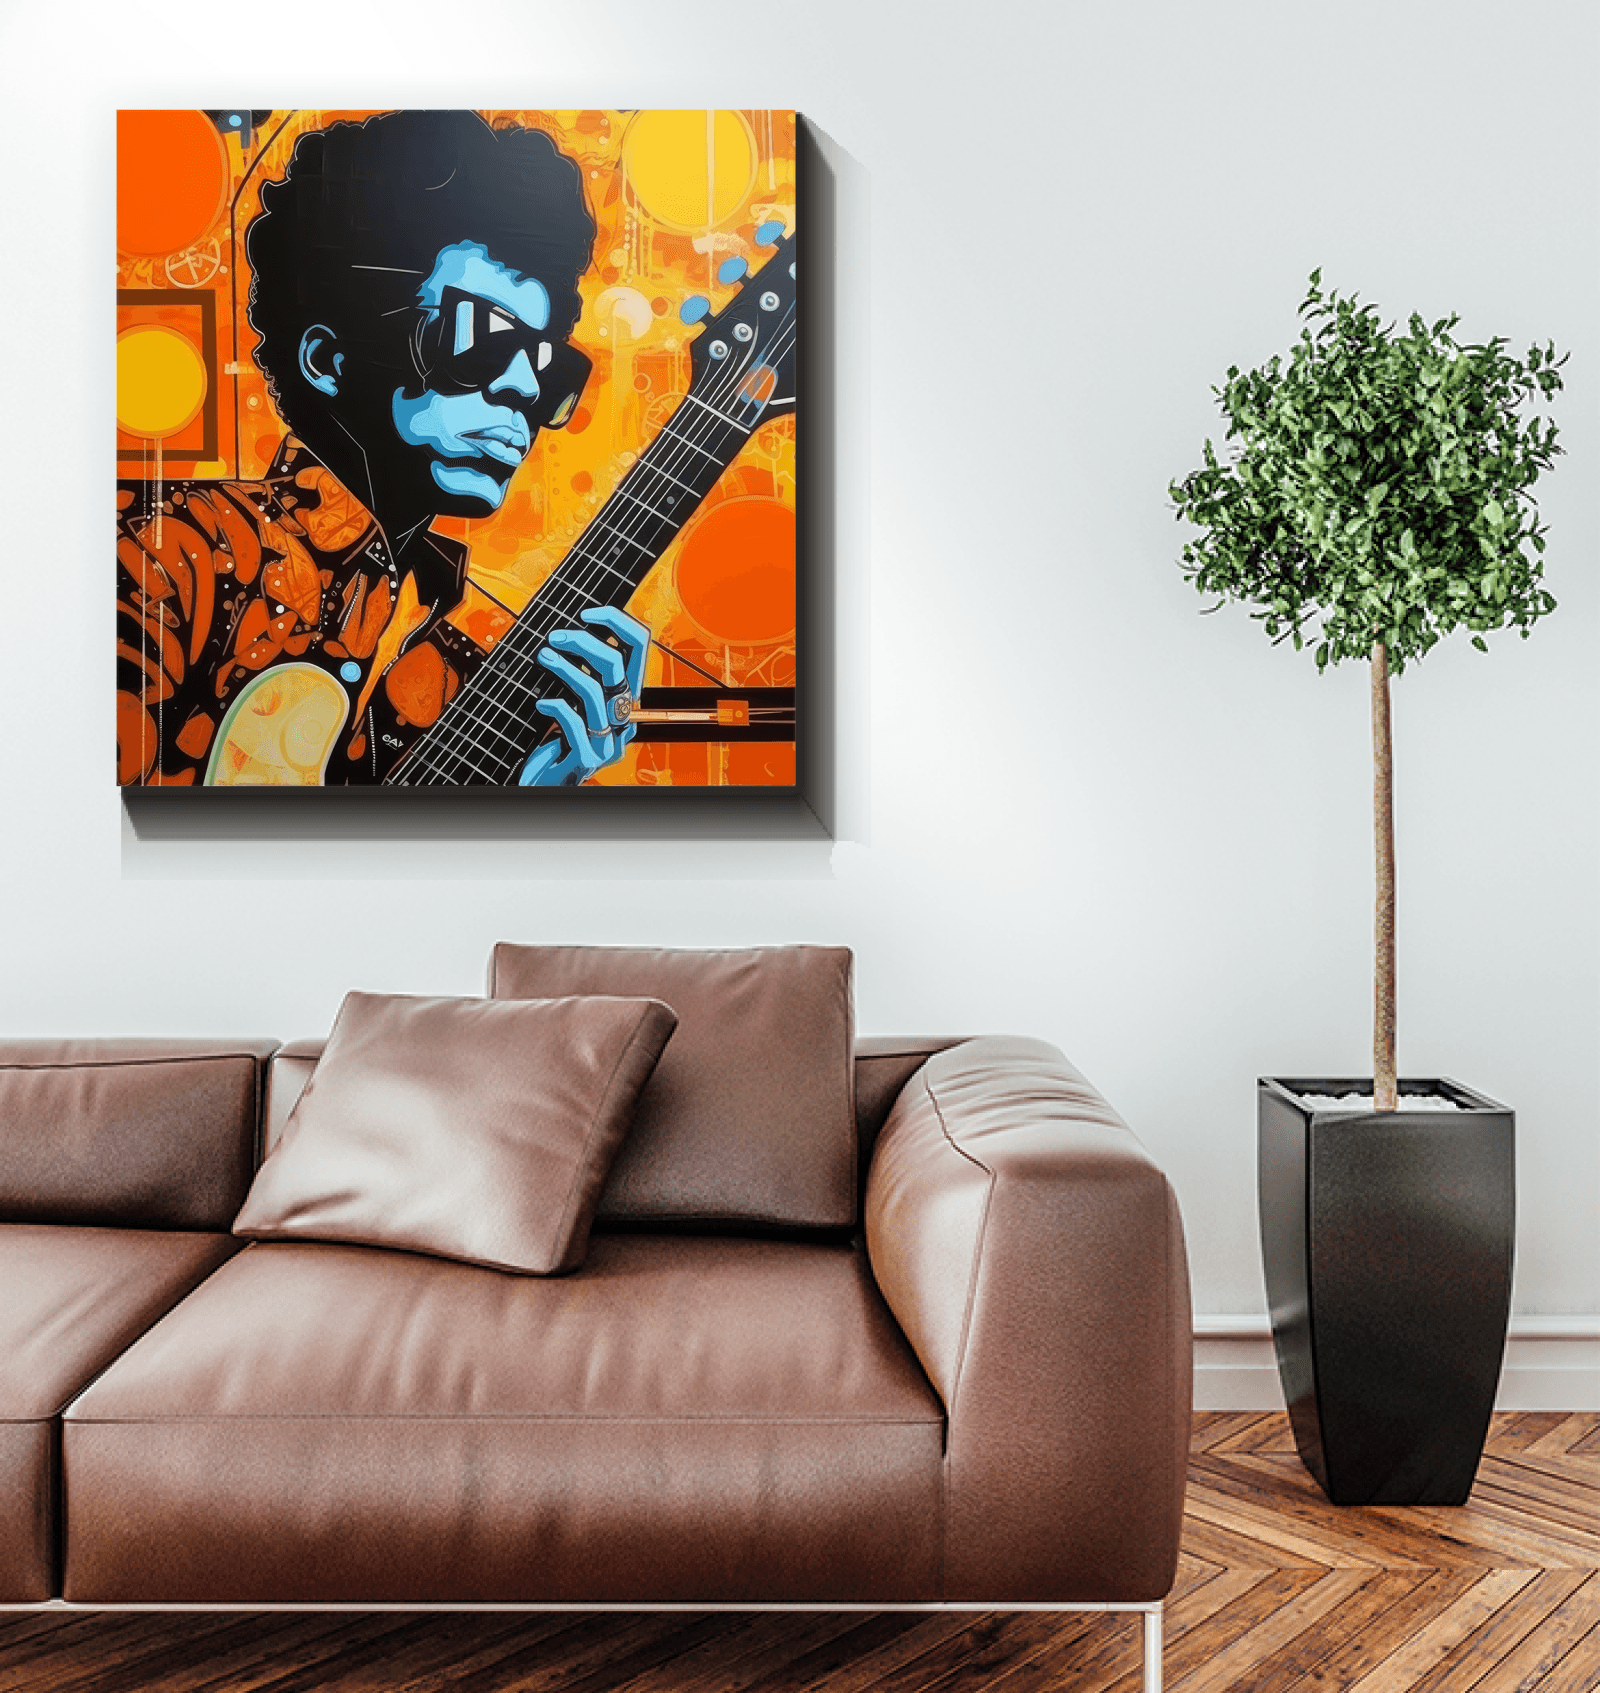 Decorative Pop Music Playground Canvas for Wall Art.